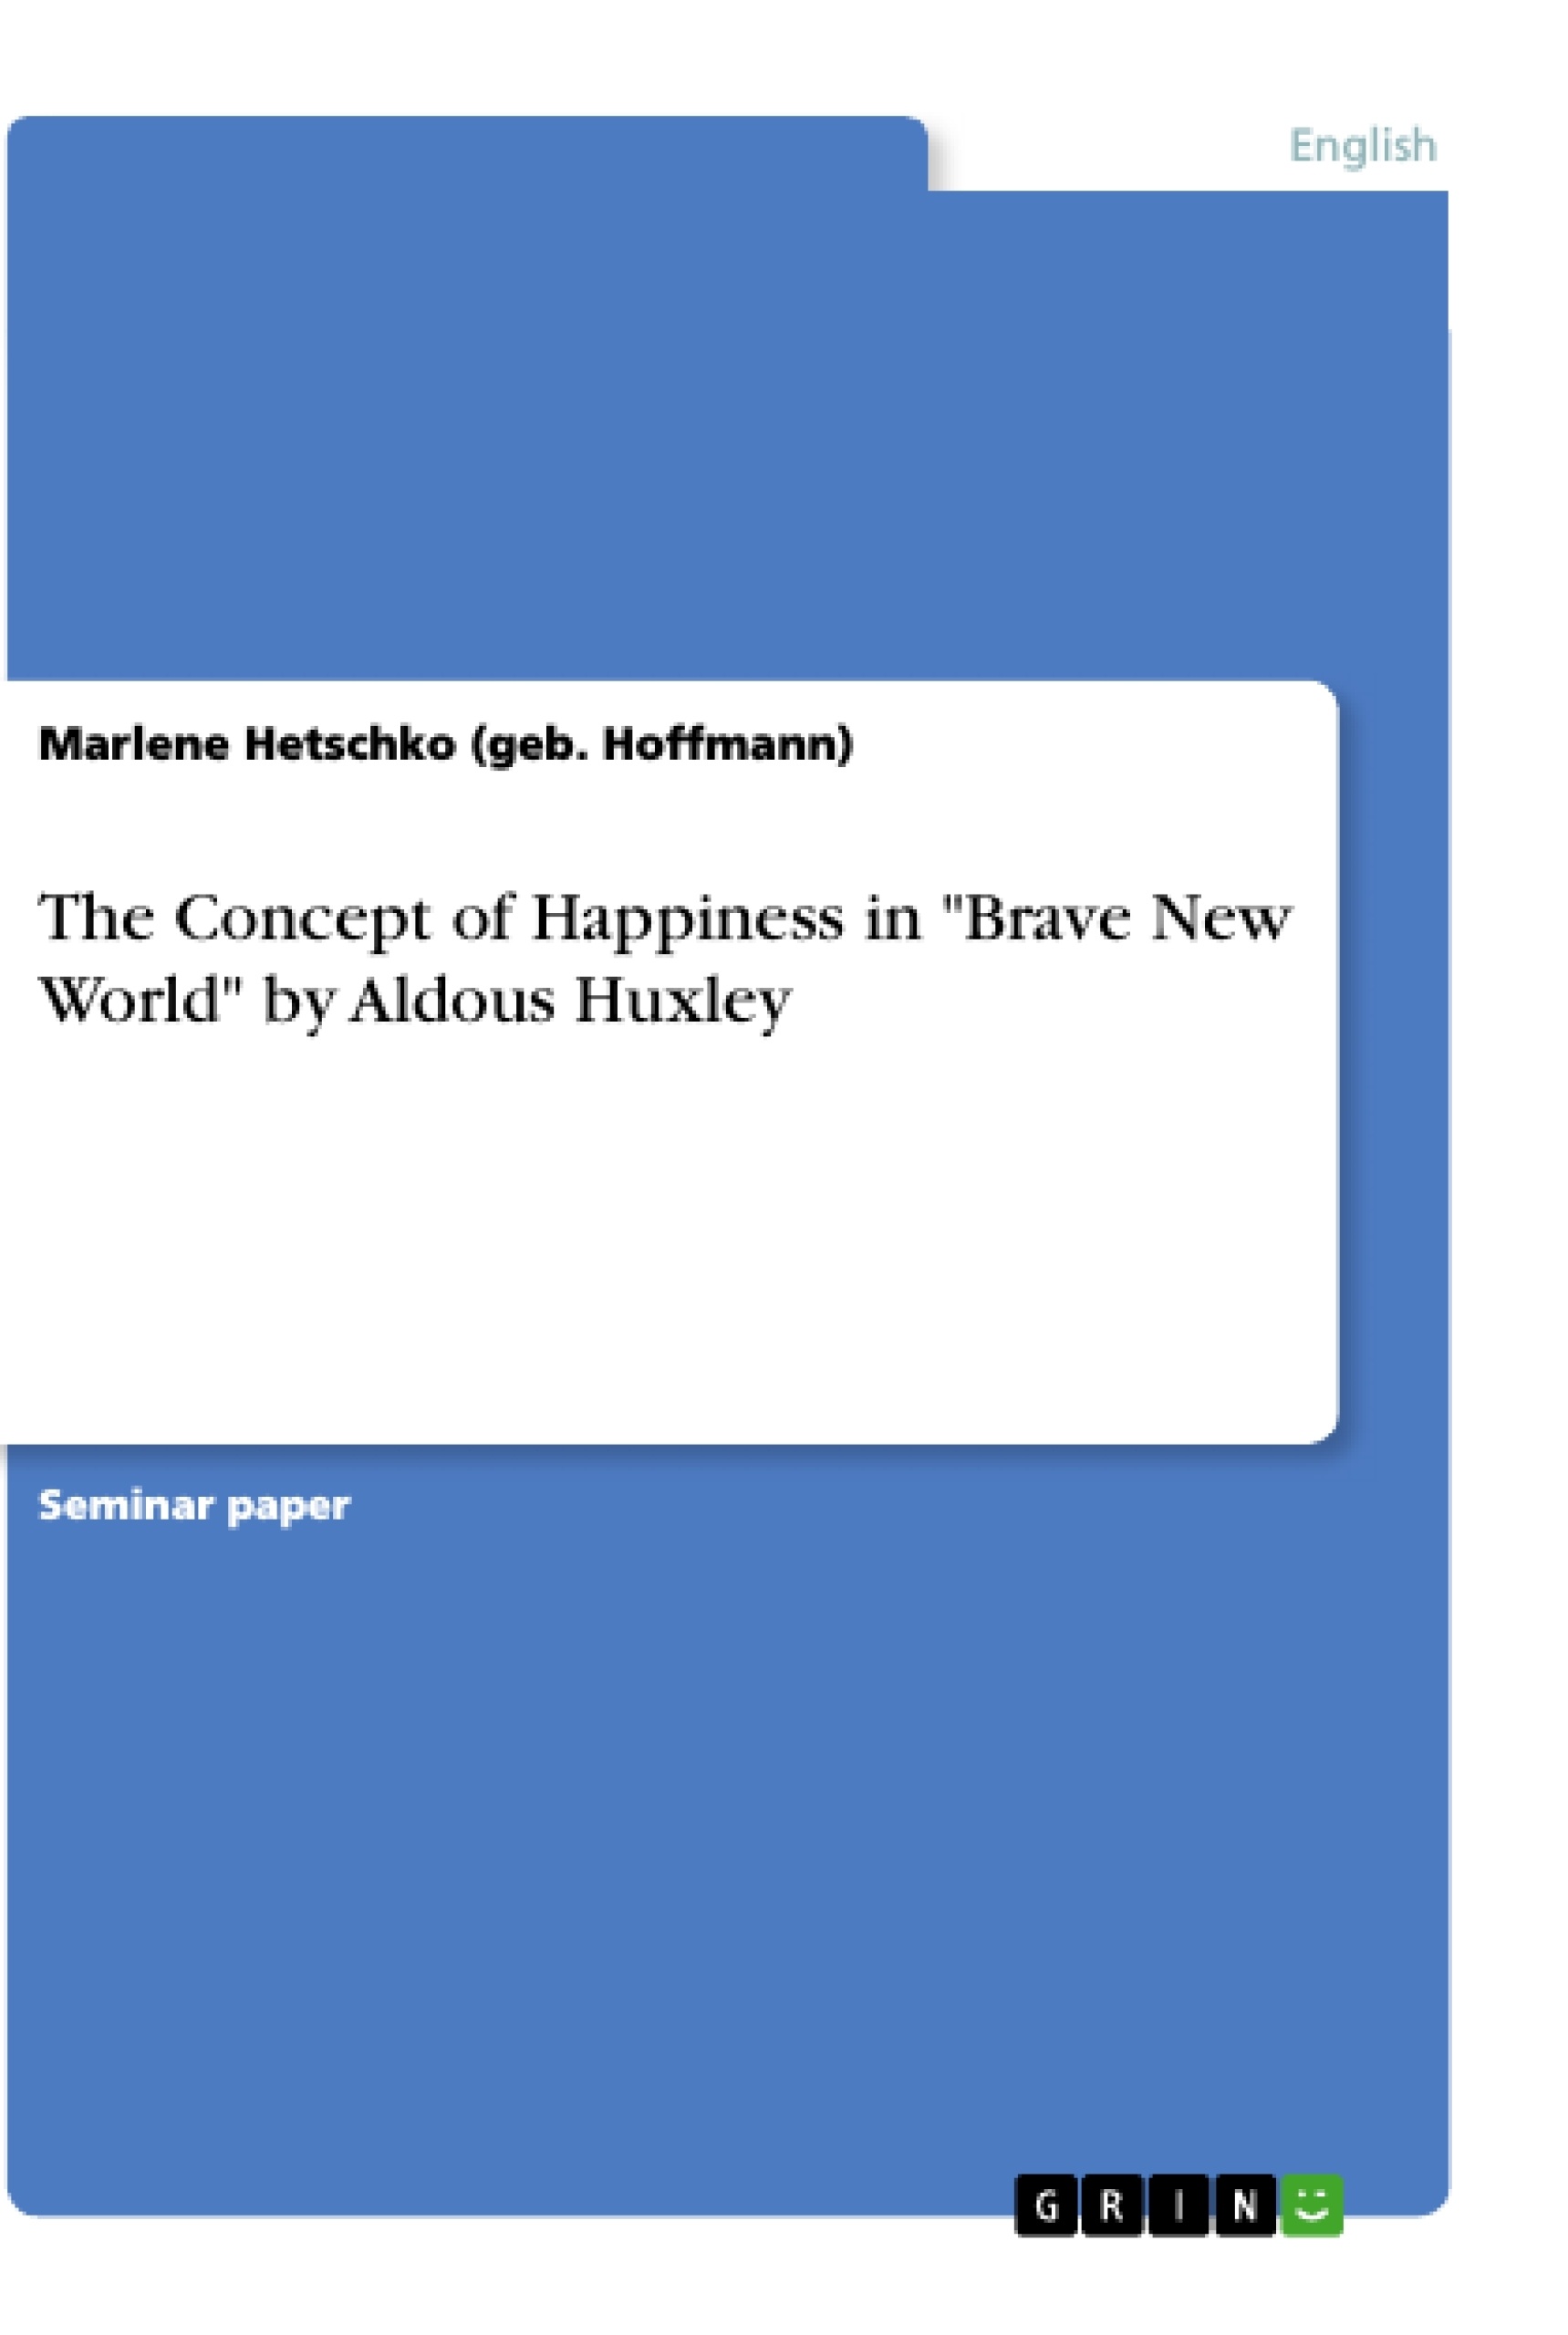 Título: The Concept of Happiness in "Brave New World" by Aldous Huxley